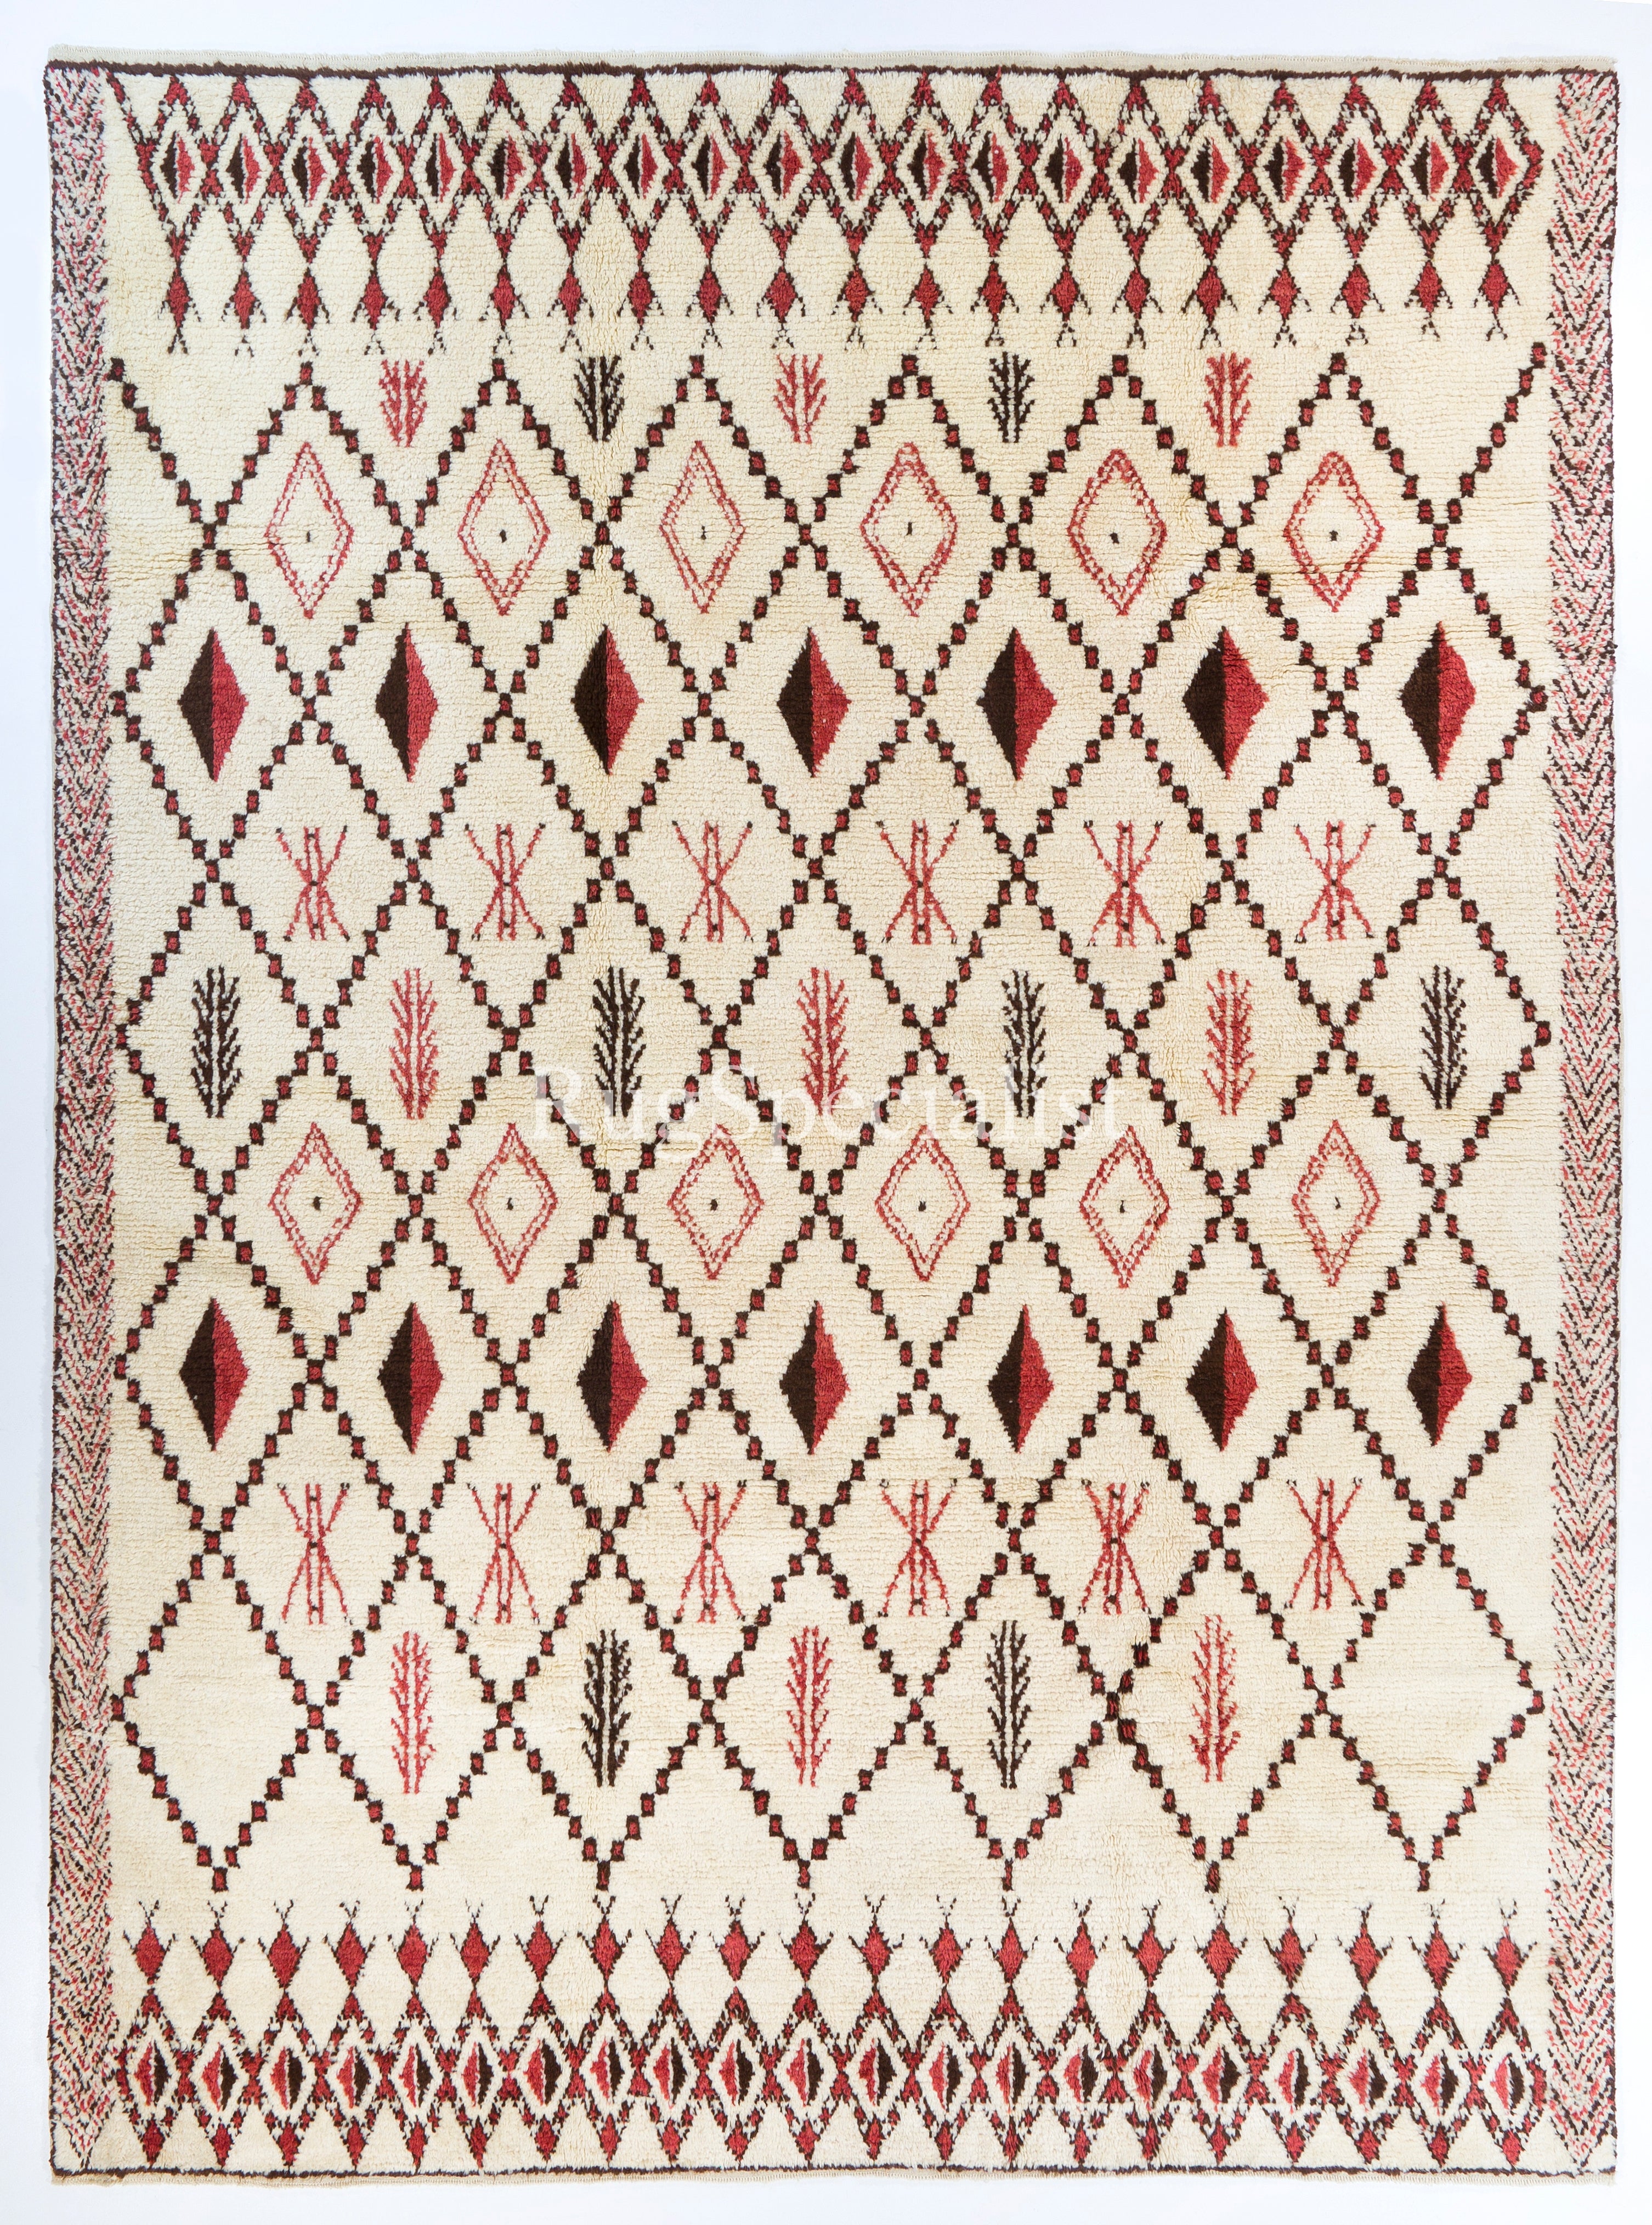 10.5x14.4 Ft Modern Moroccan Tulu Wool Rug in Beige, Red & Brown. Made-to-order